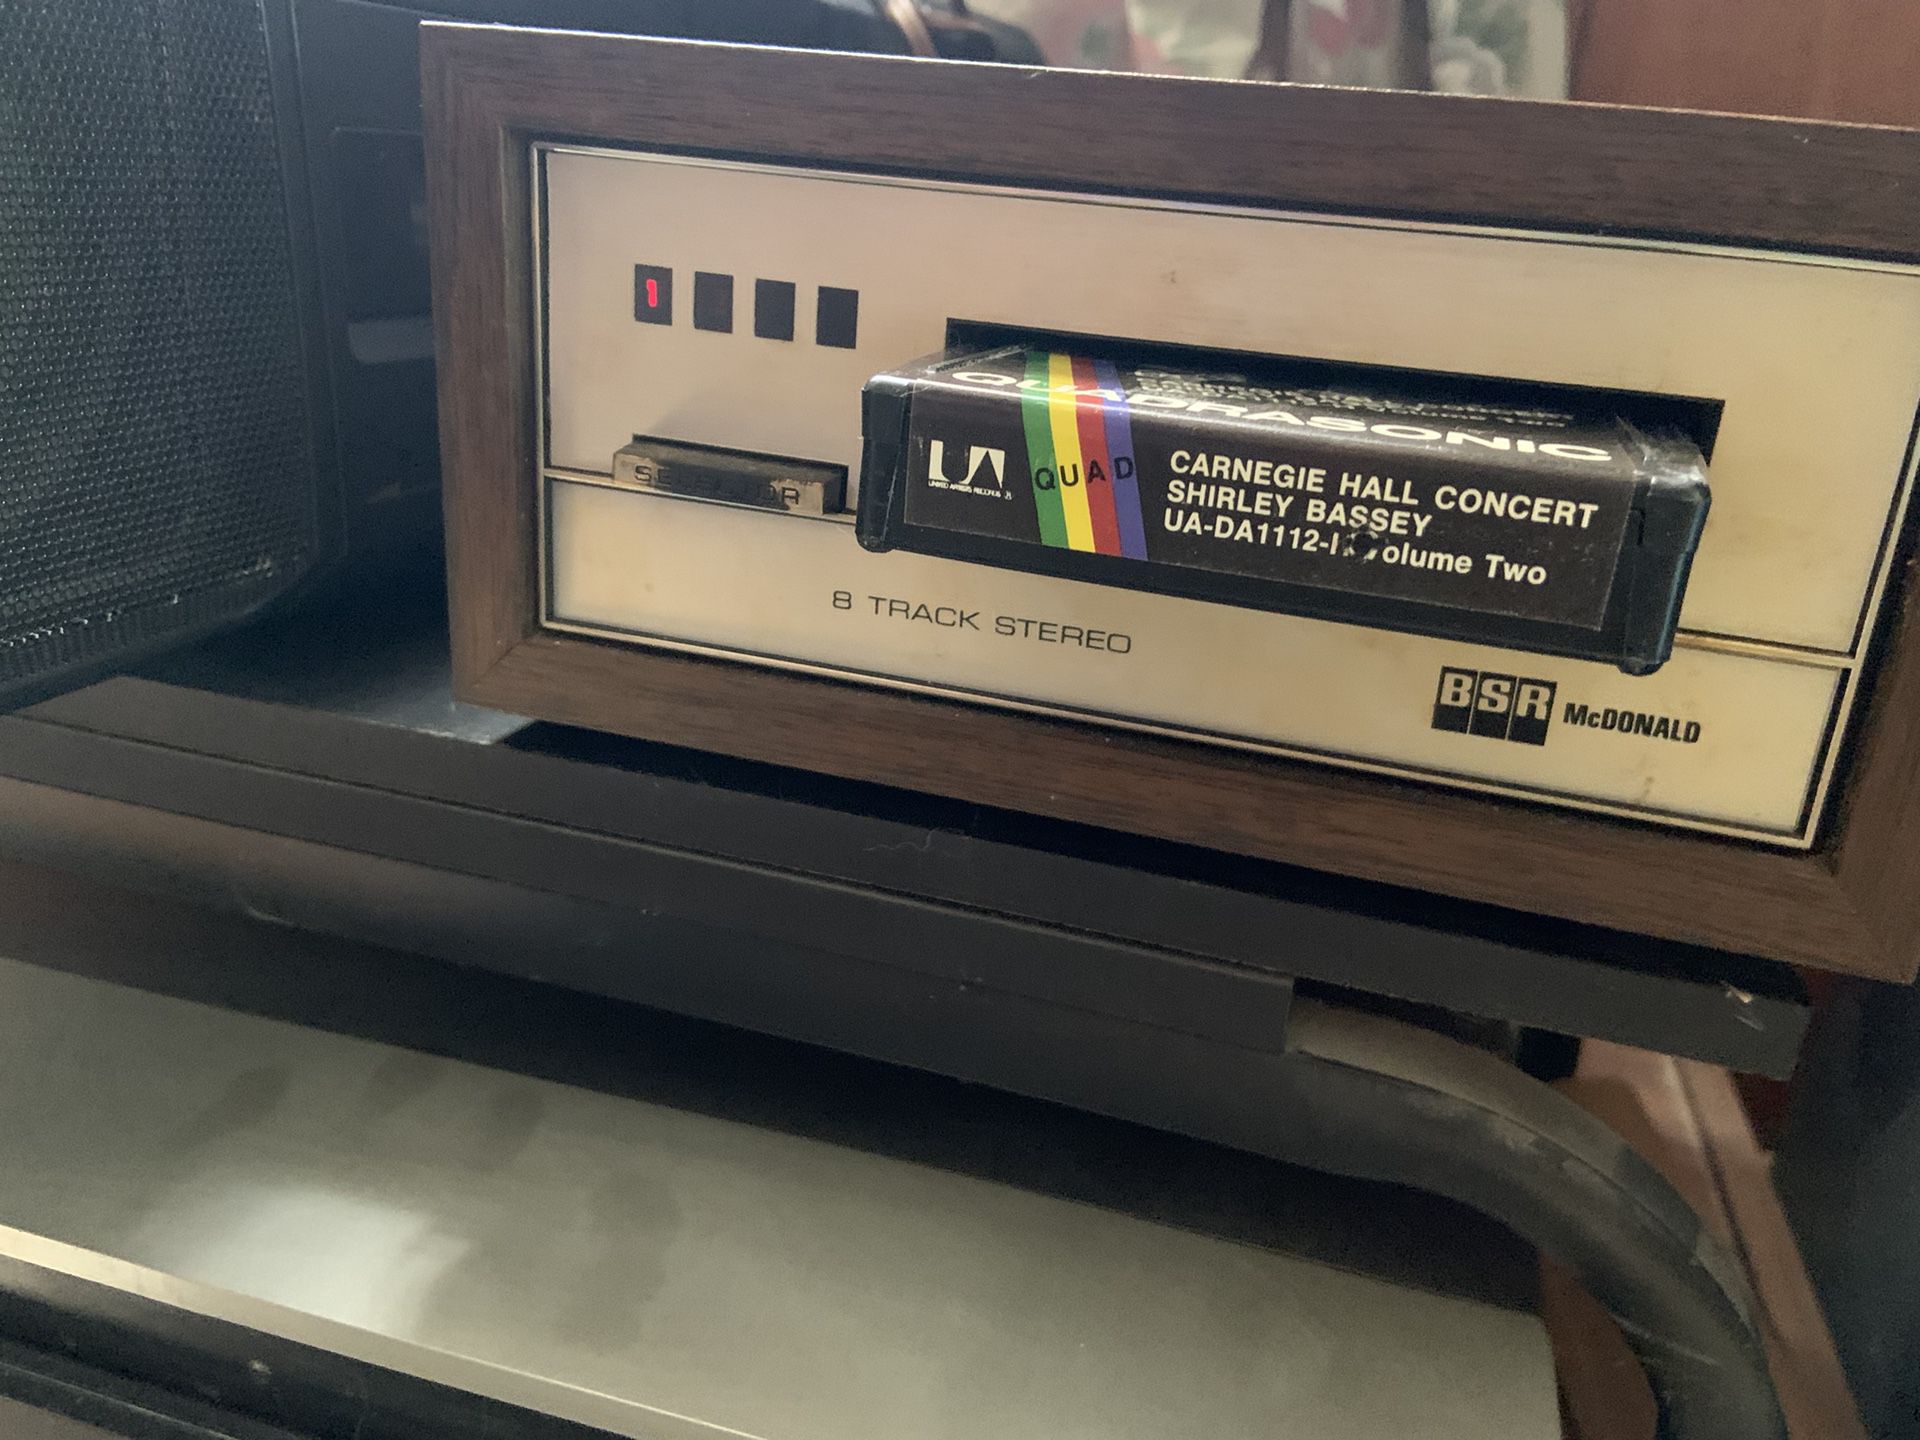 On Hold For Pickup Pending) Vintage 8 Track Player. Plug Into Outlet And Need To Plug Into Speakers 